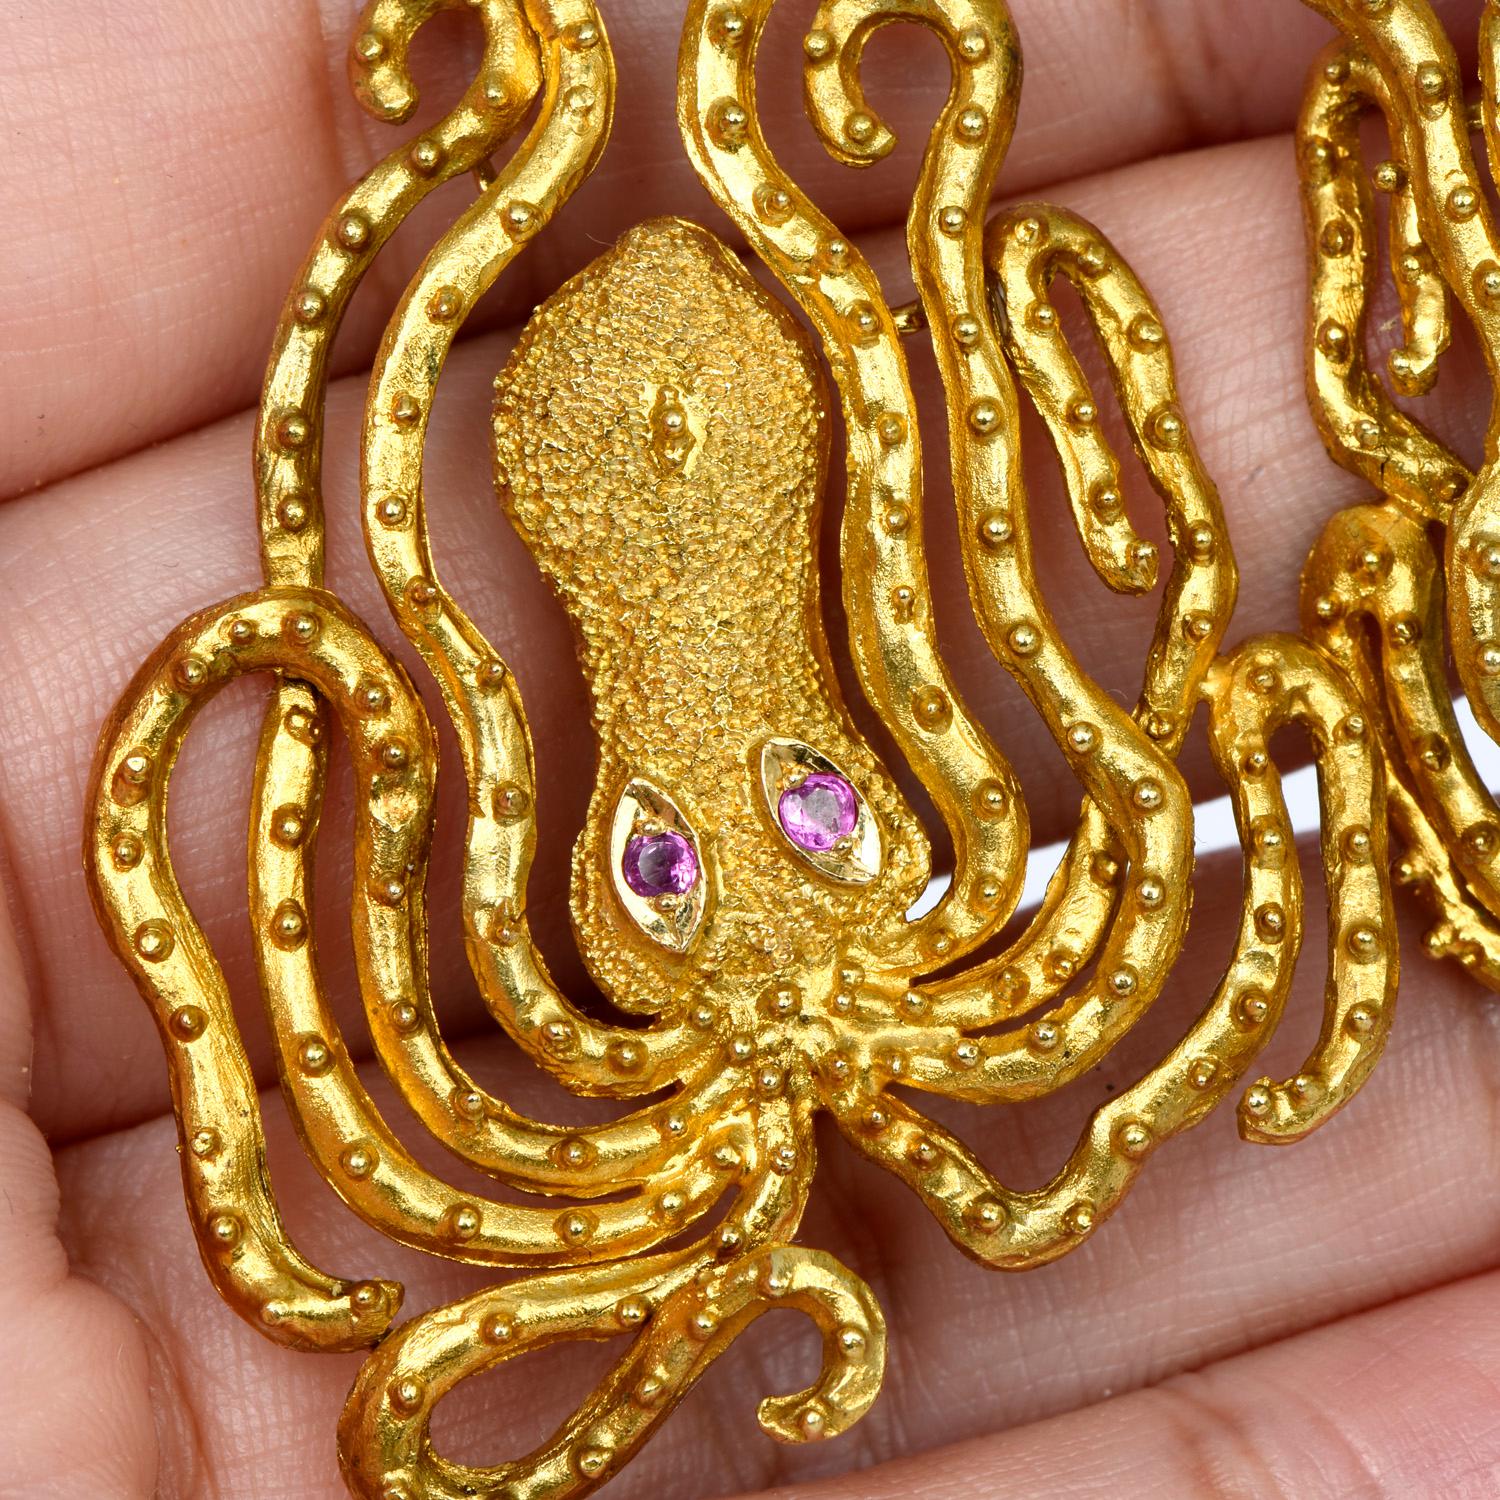 Vintage Ilias Lalaounis, these earrings represent the mystery, flexibility, fluidity & adaptability of the Octopus, 

Crafted in solid 18K yellow gold and weighing 25.2 grams, with a beaded grain finish & polished accents.

The eyes are composed of